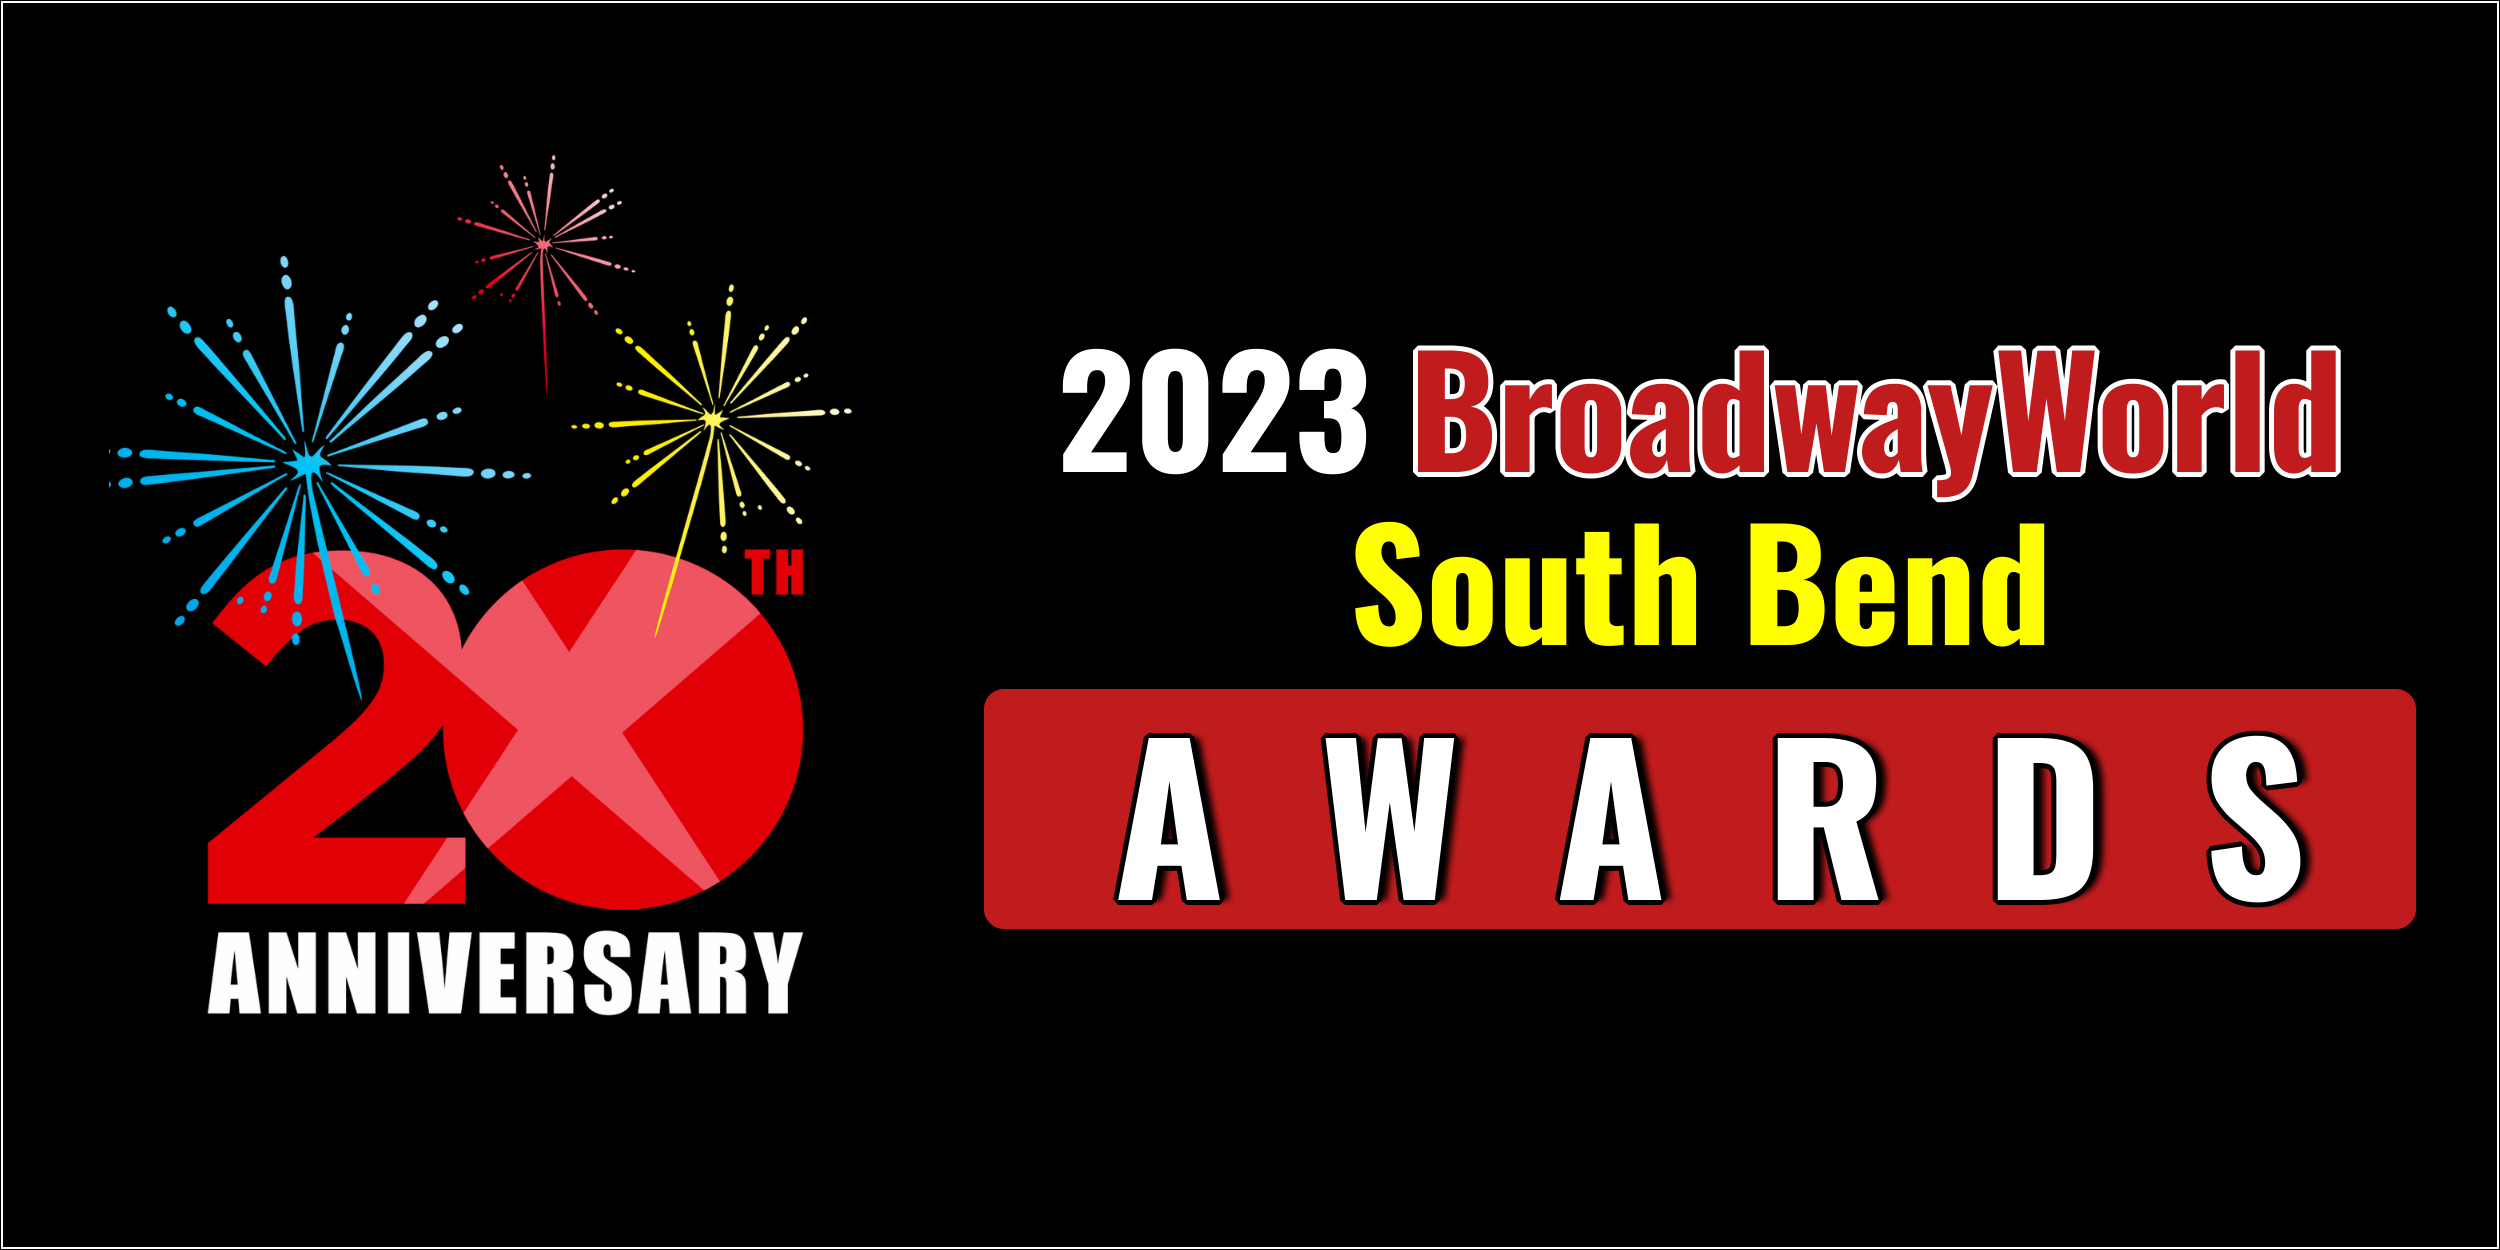 Latest Standings Announced For The 2023 BroadwayWorld South Bend Awards; THE OUTSIDERS Leads Best Play! 